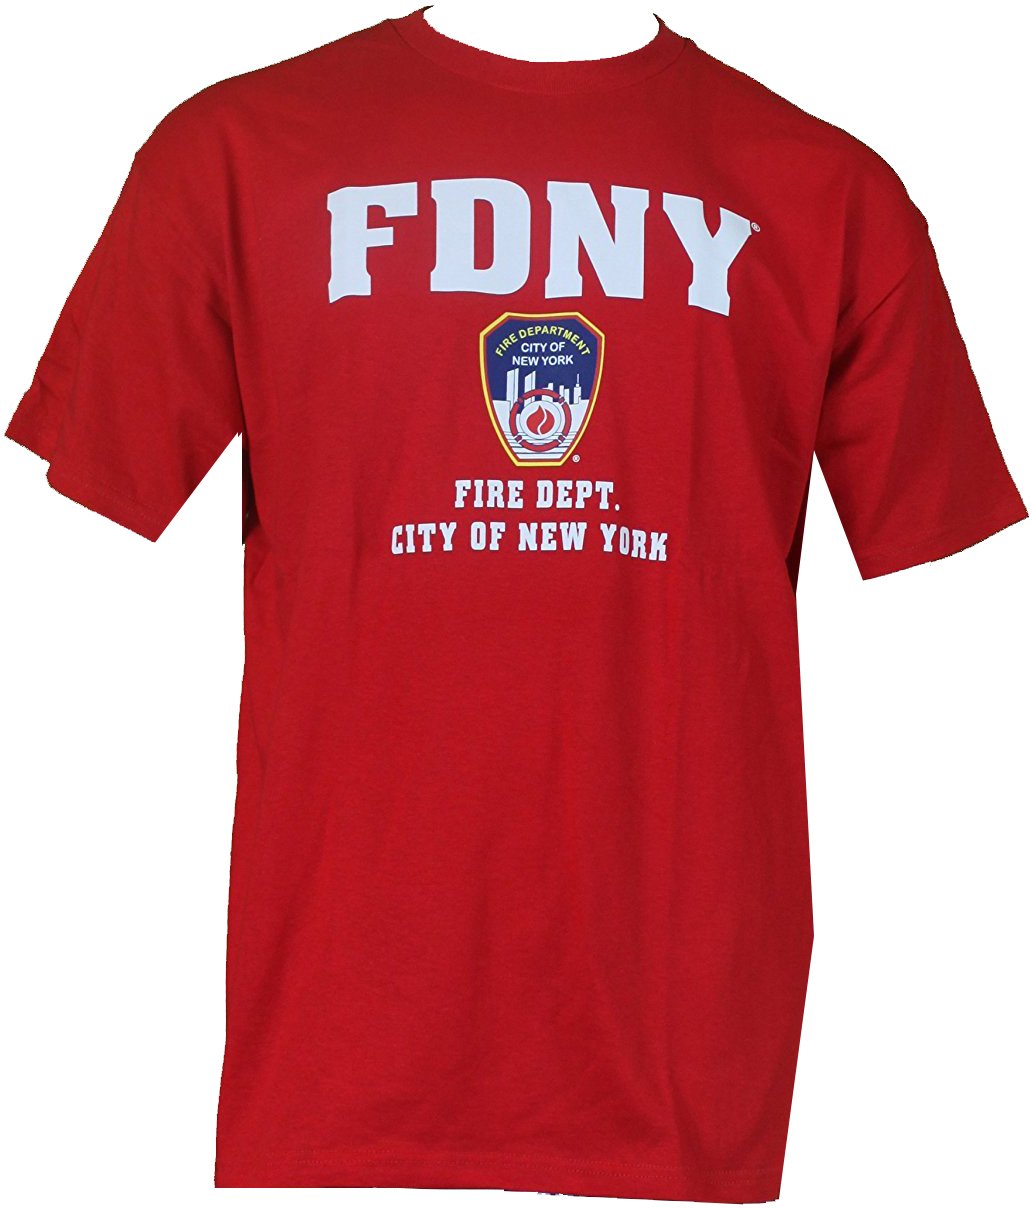 FDNY Men's Red T-Shirt with Classic Fire Department Logo and Shield